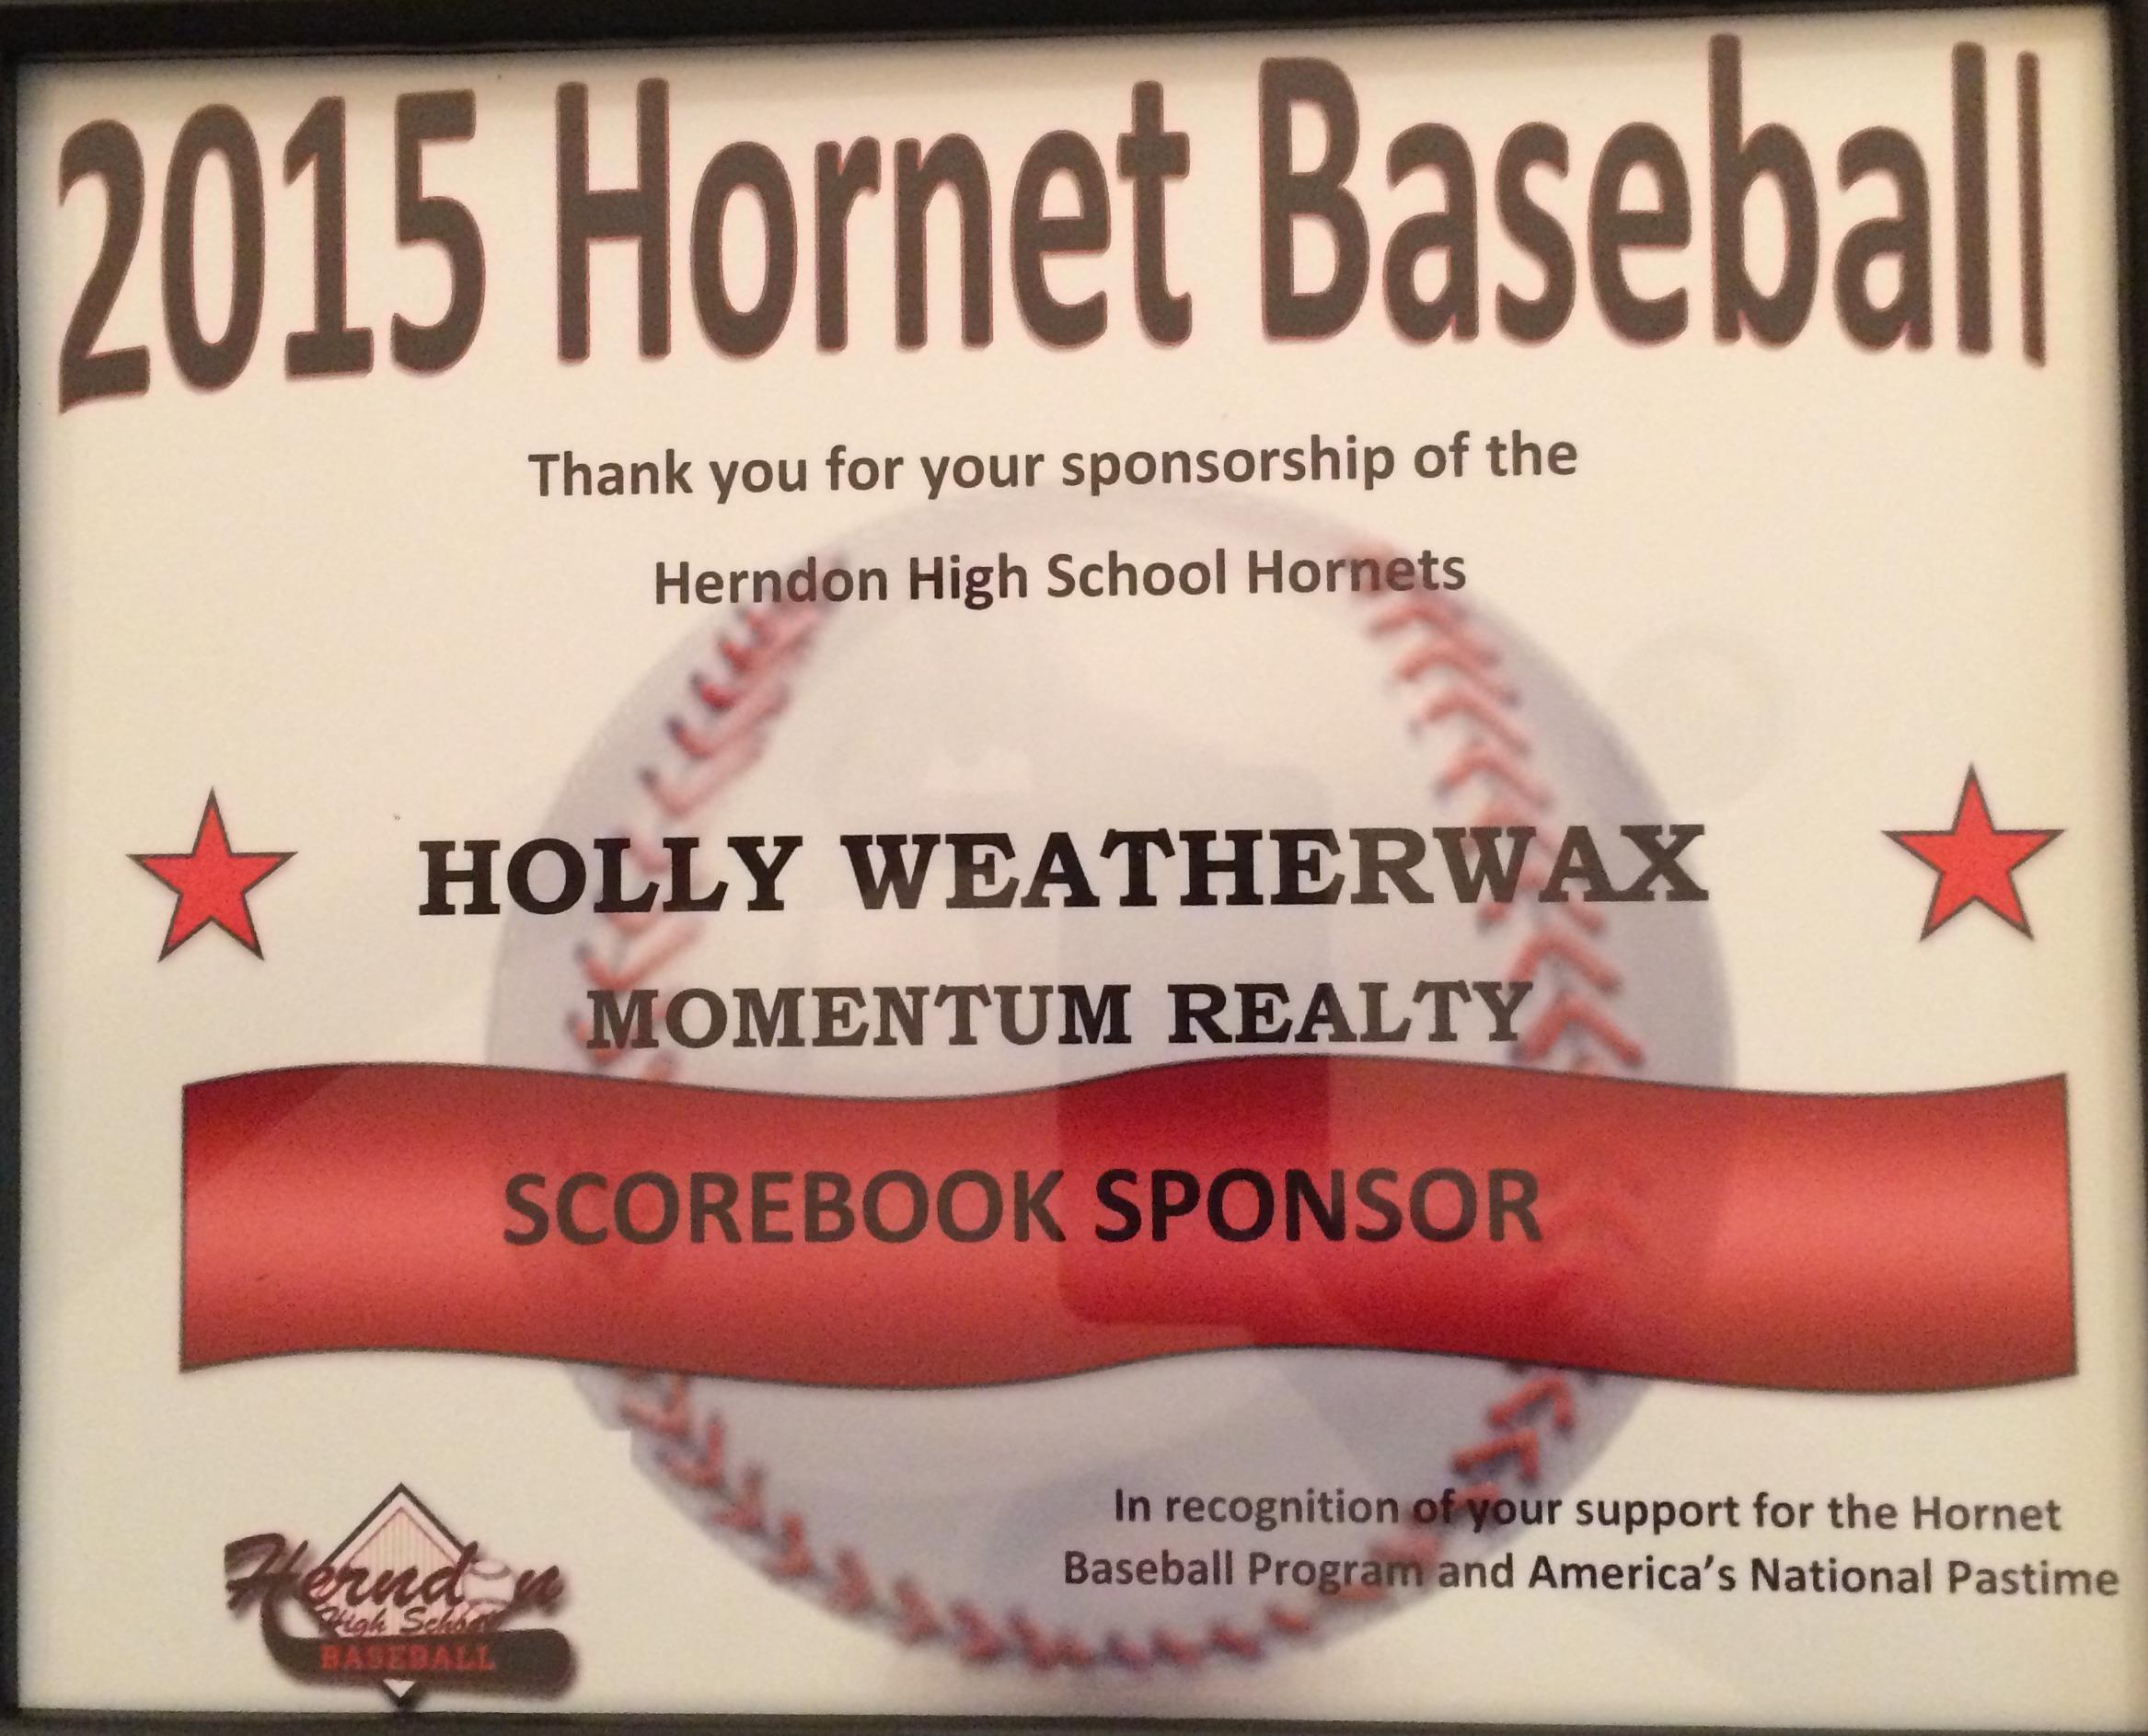 Honored to be a sponsor of Herndon High School's baseball team this year!